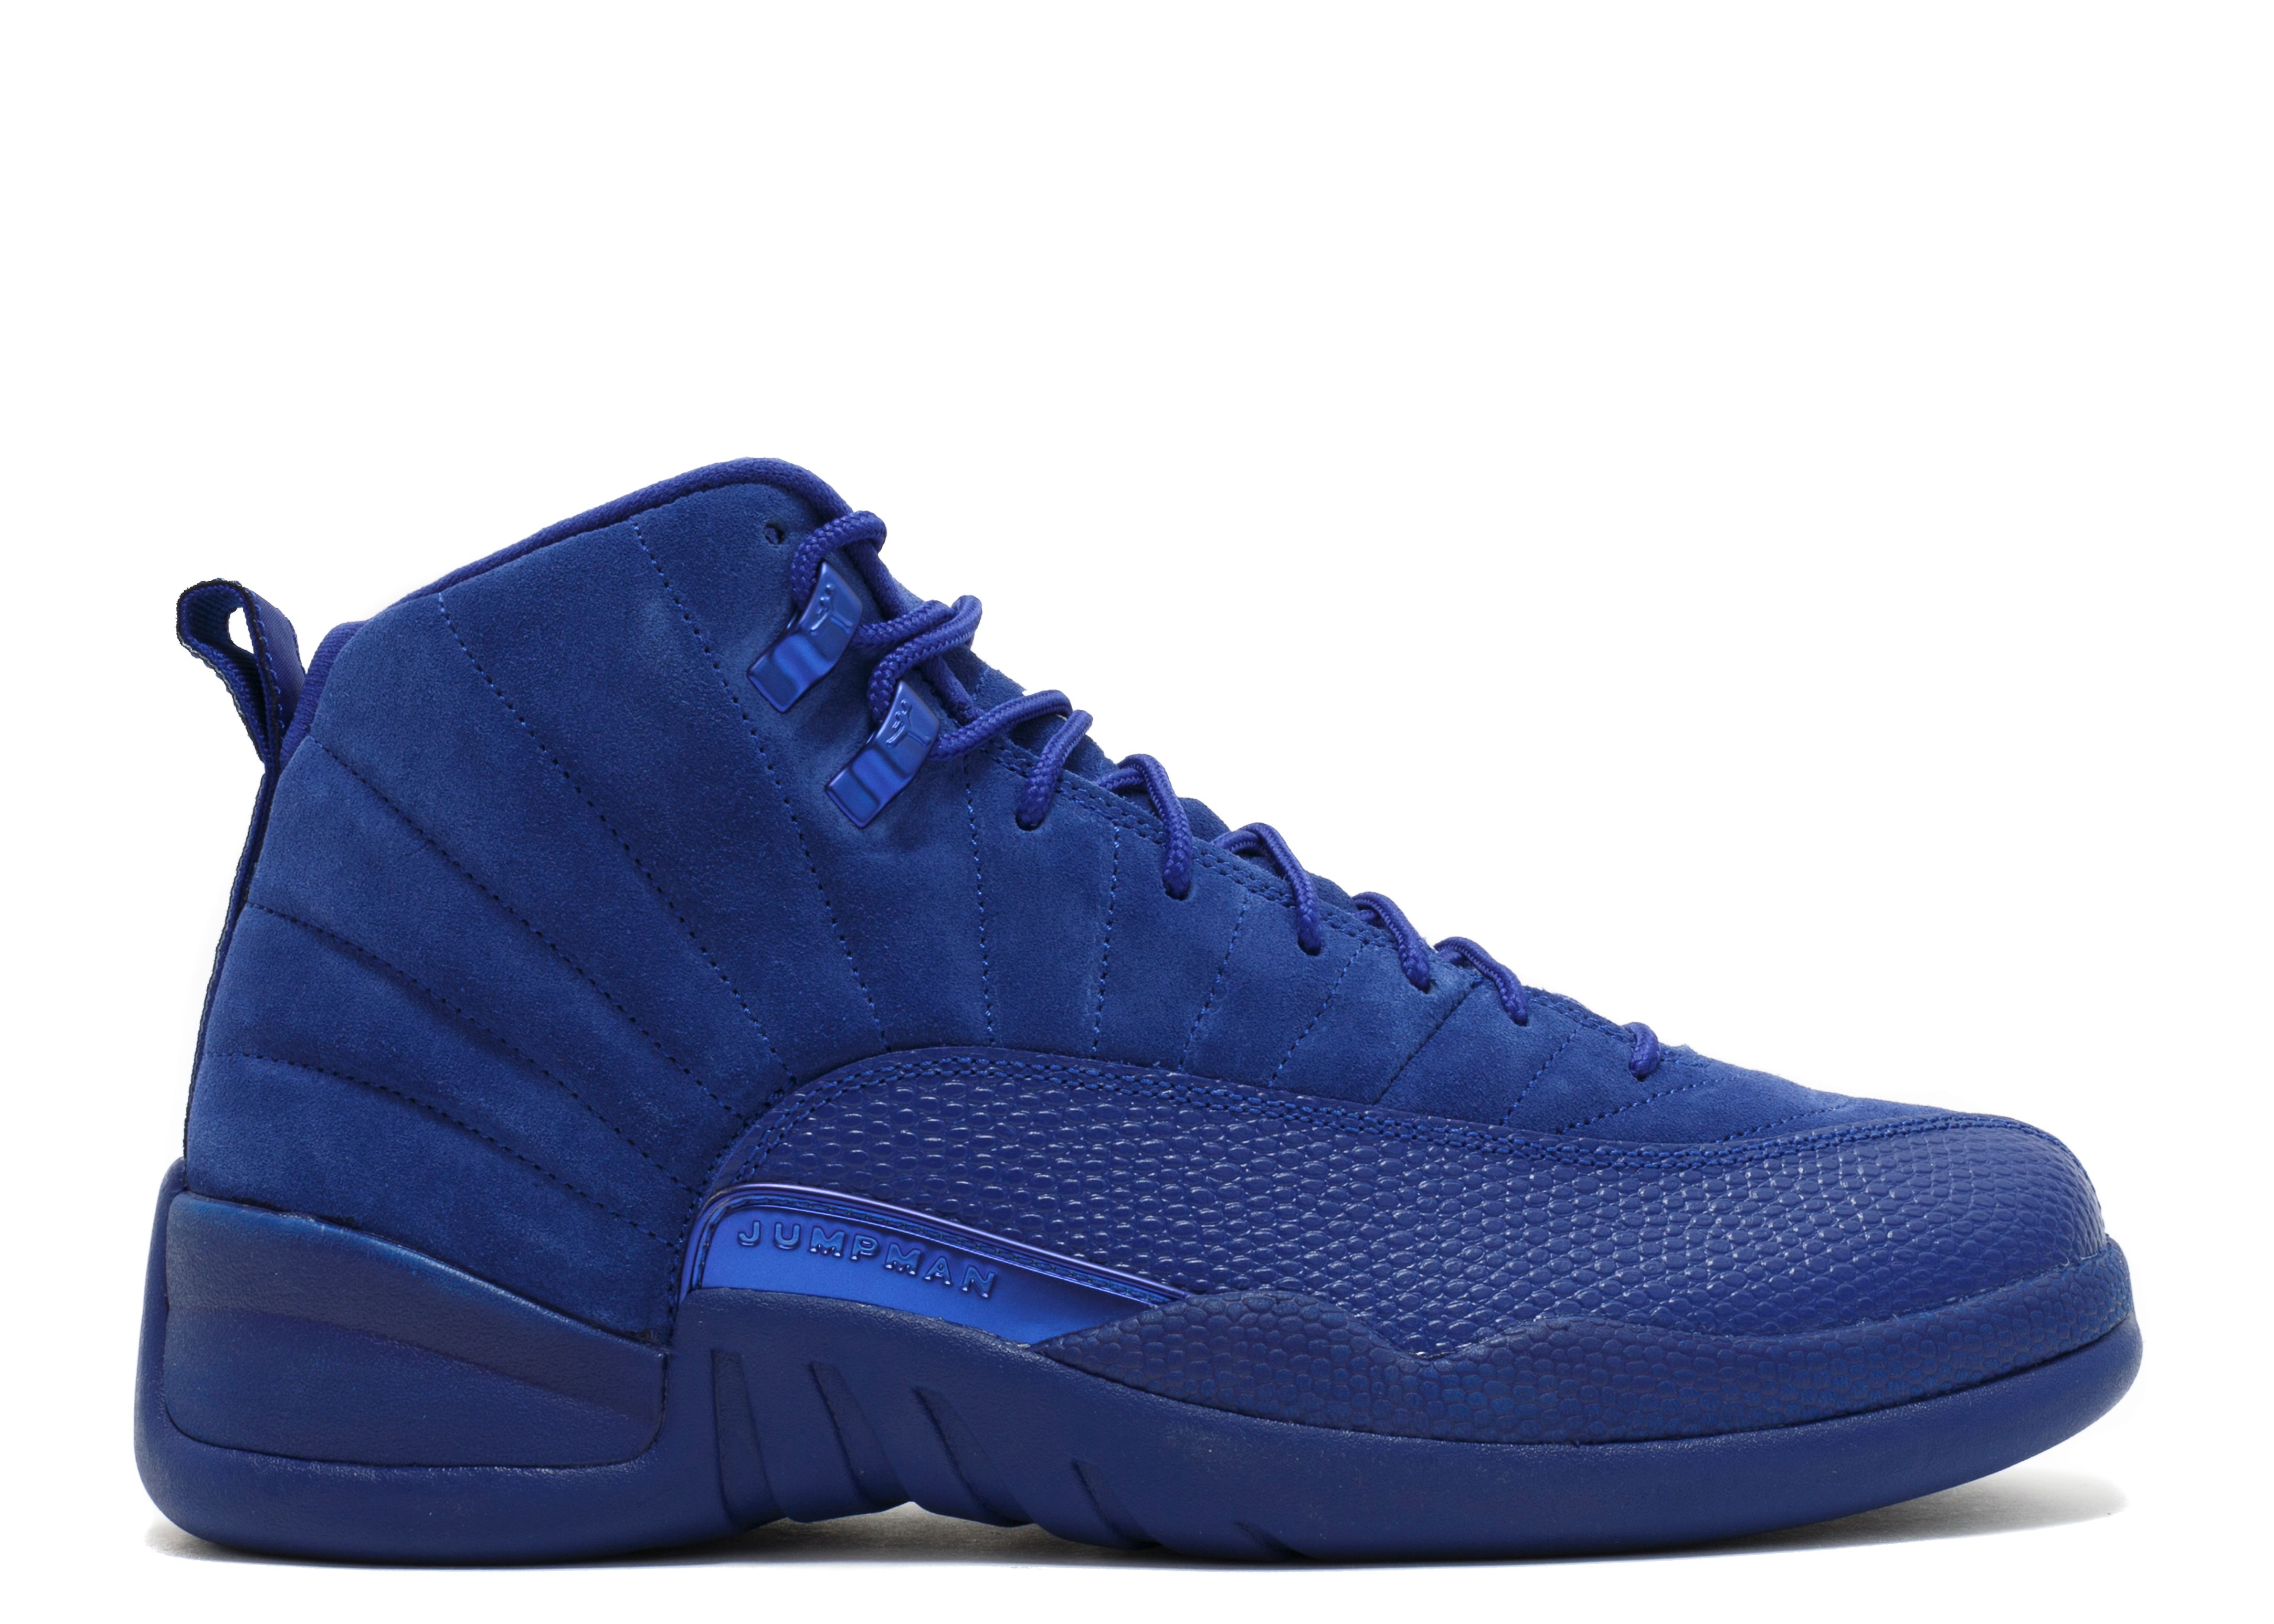 the blue 12s